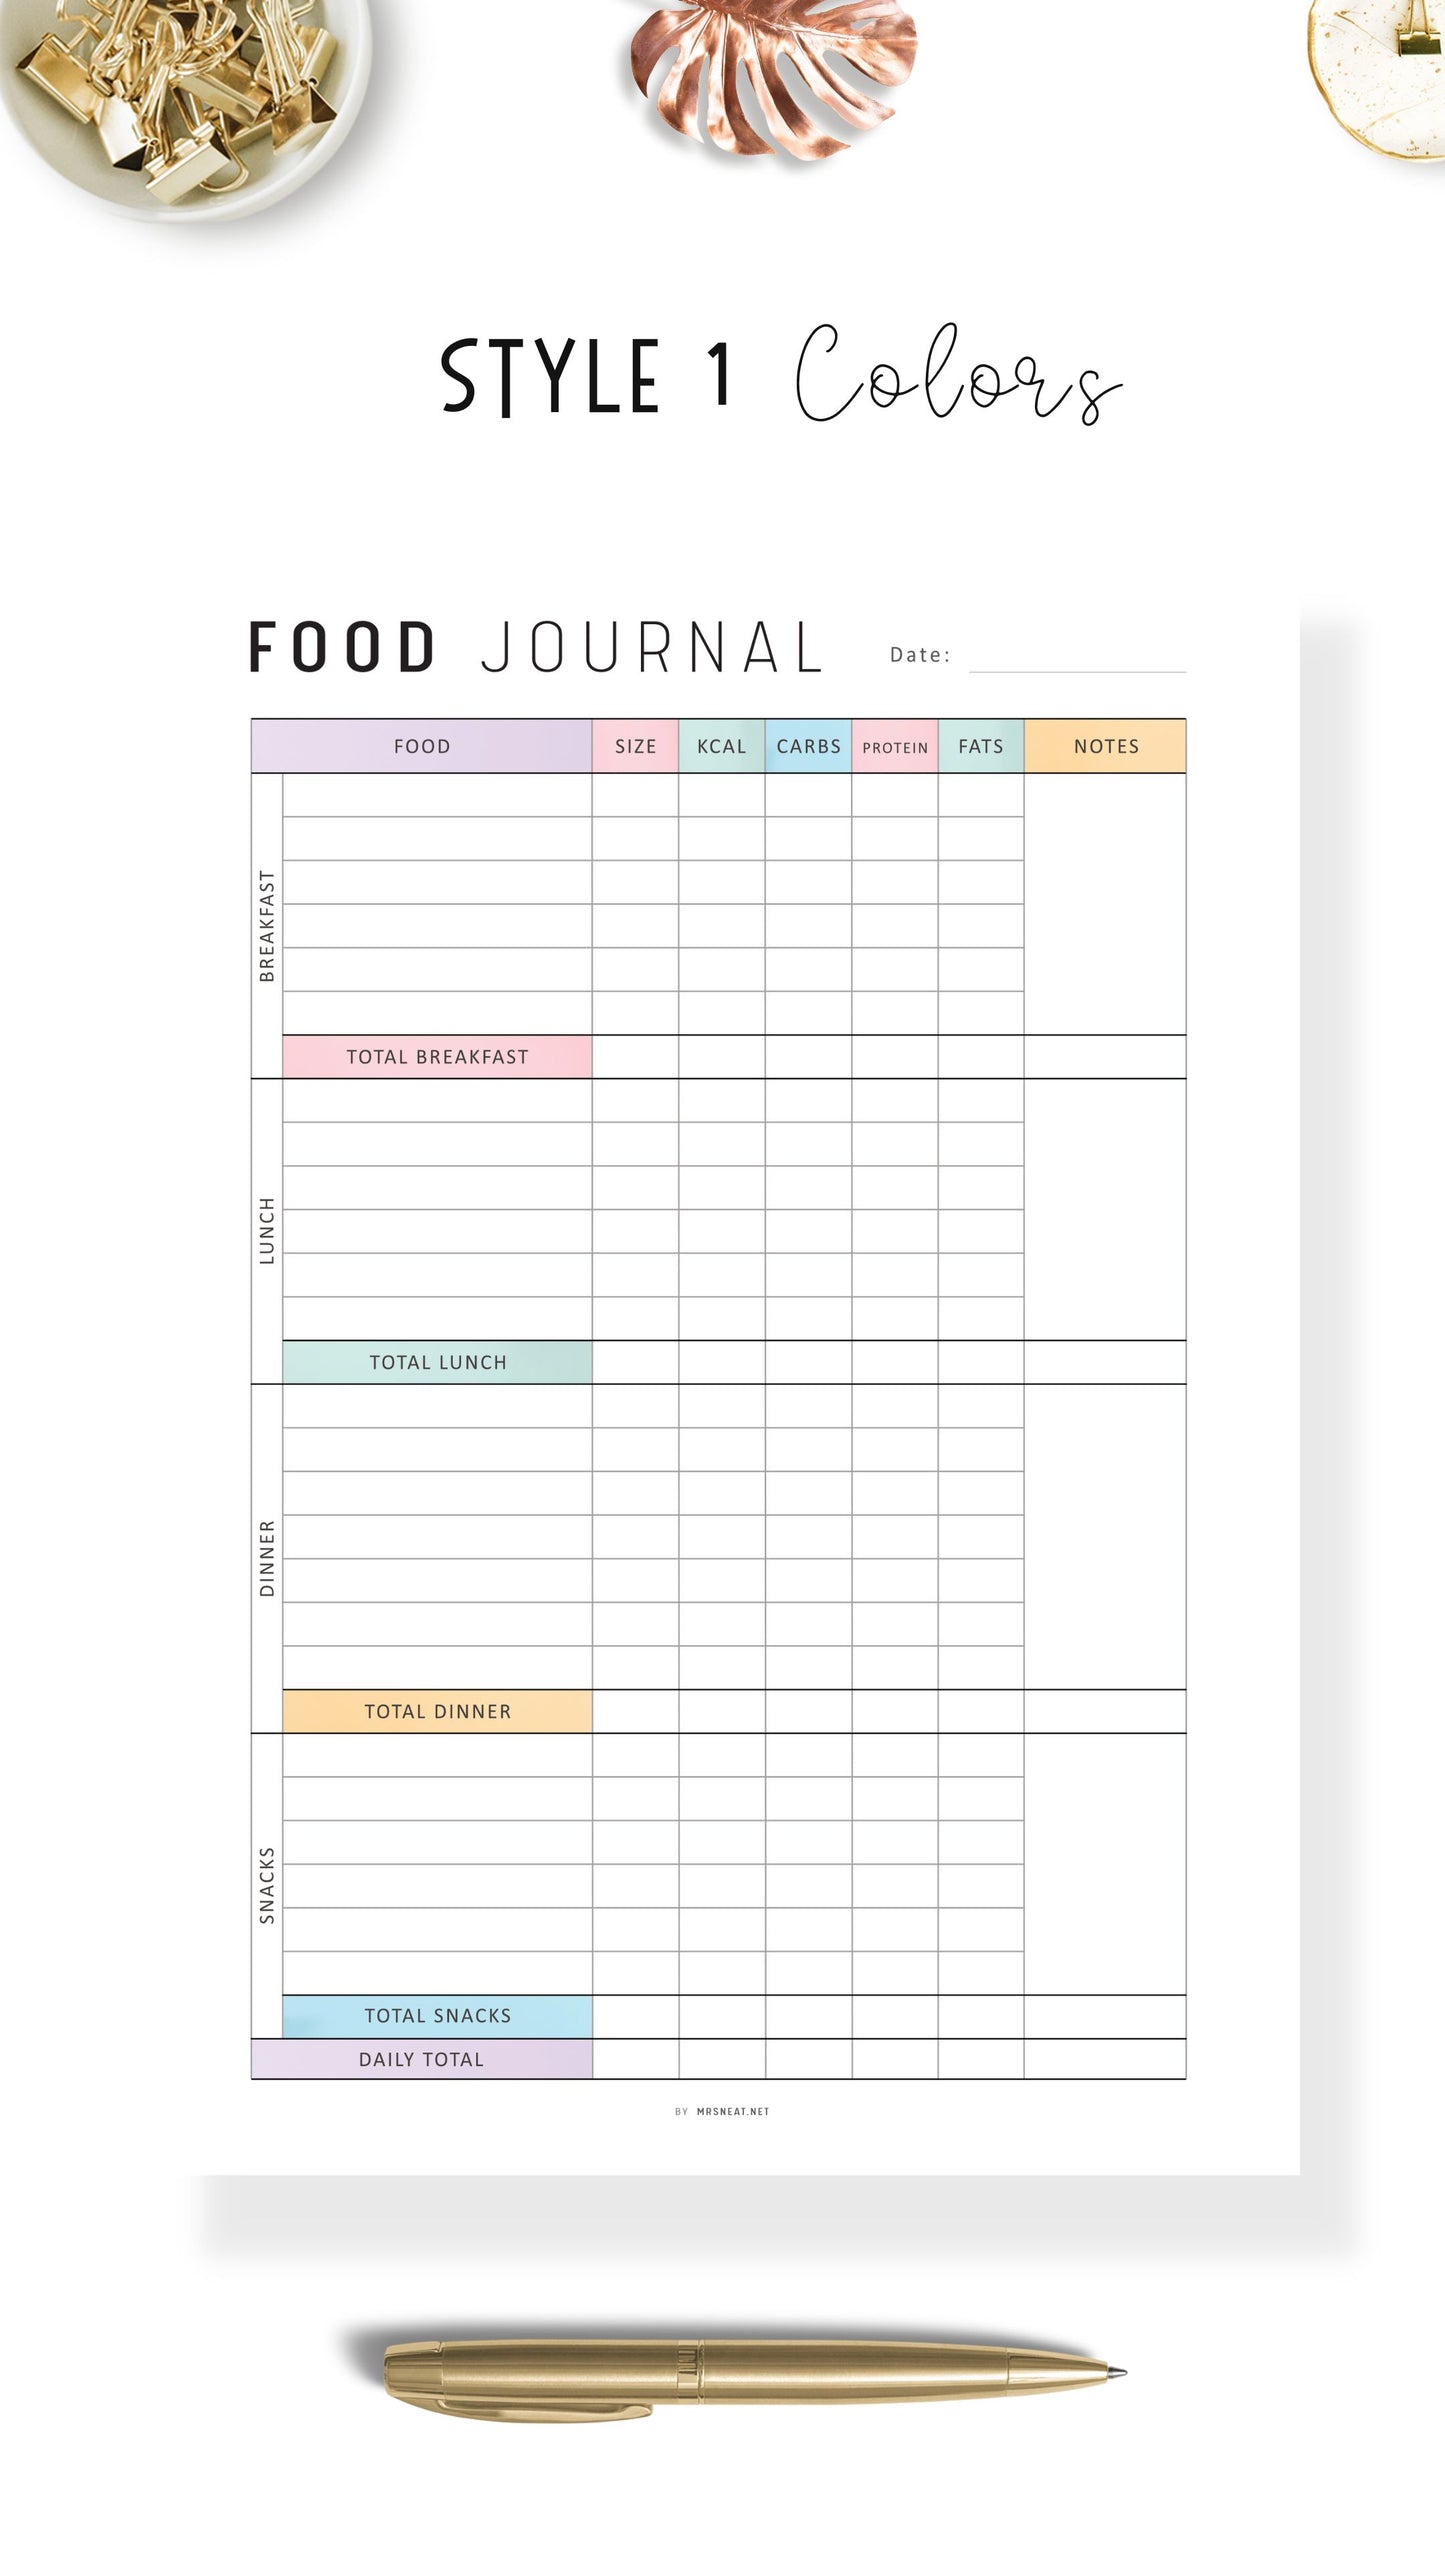 Beautiful Daily Calorie Tracker Template Printable, Calorie Counter PDF, My Food Diary, Digital Daily Food Journal, A4, A5, Letter, Half Letter, Colorful Page